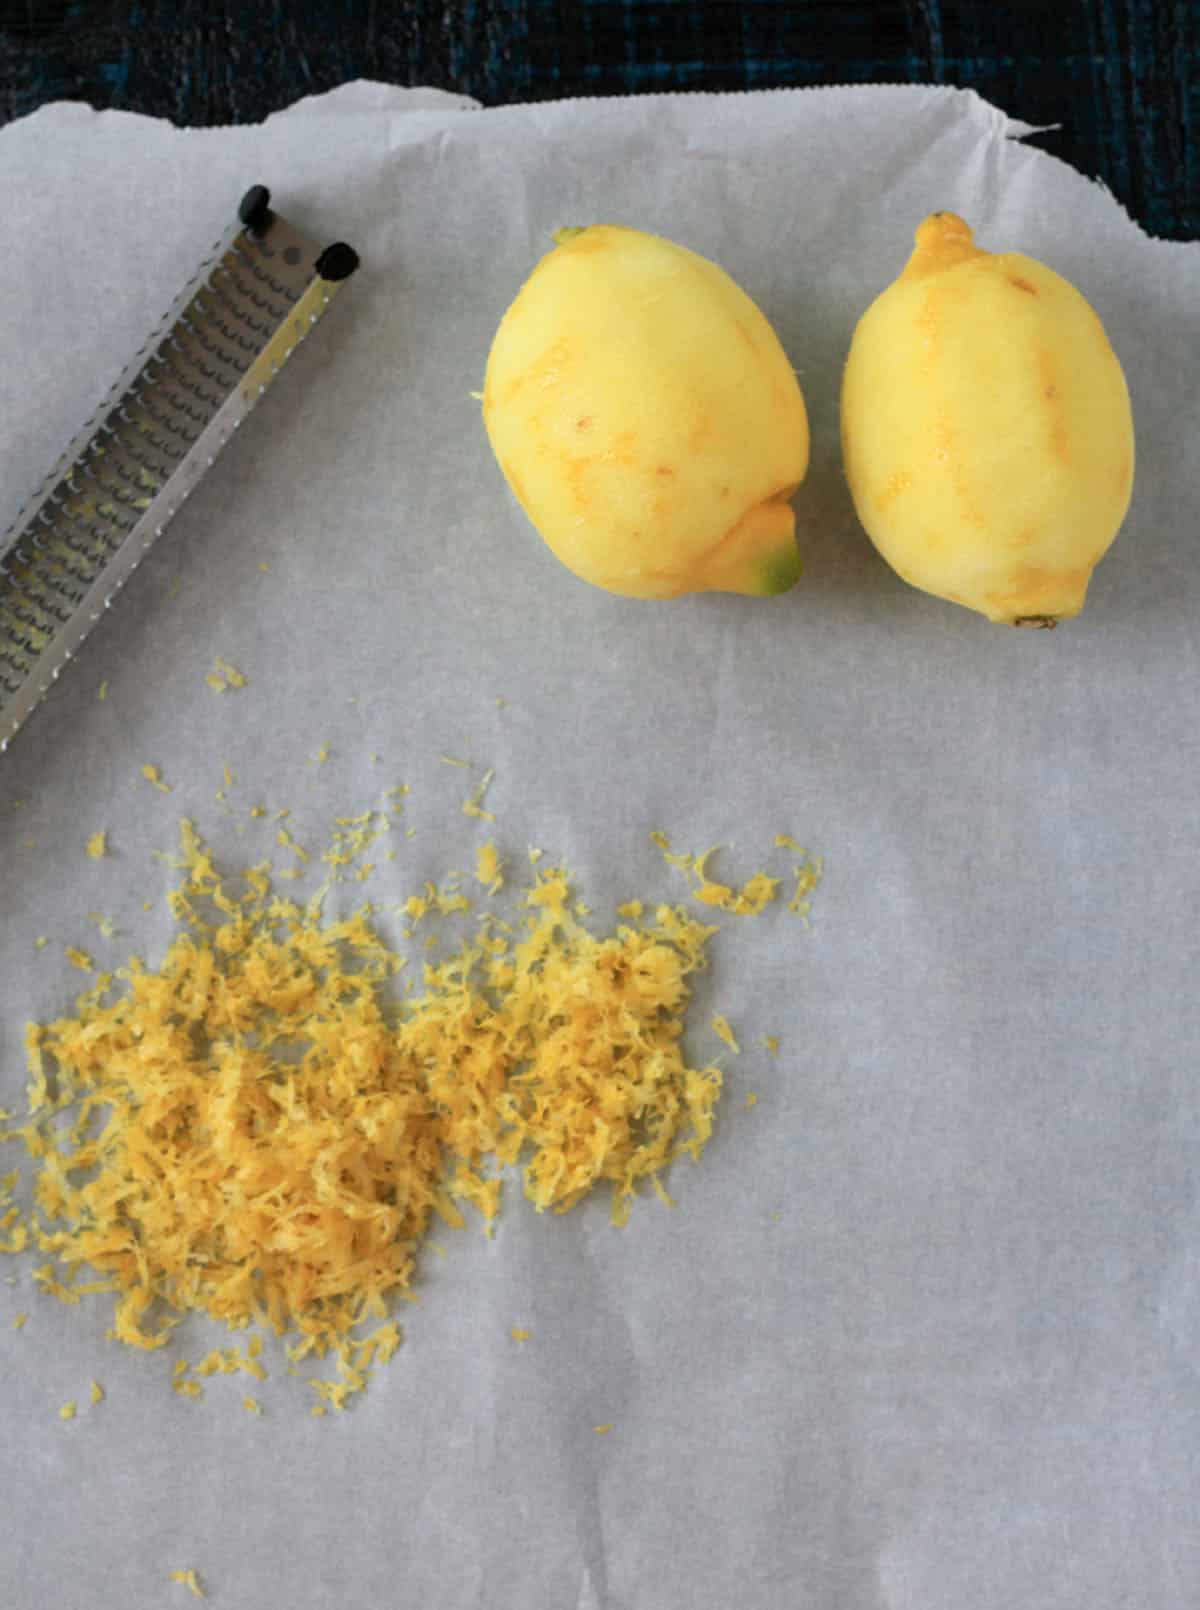 Two peeled lemons next to a pile of lemon zest and a grater on a parchment paper.